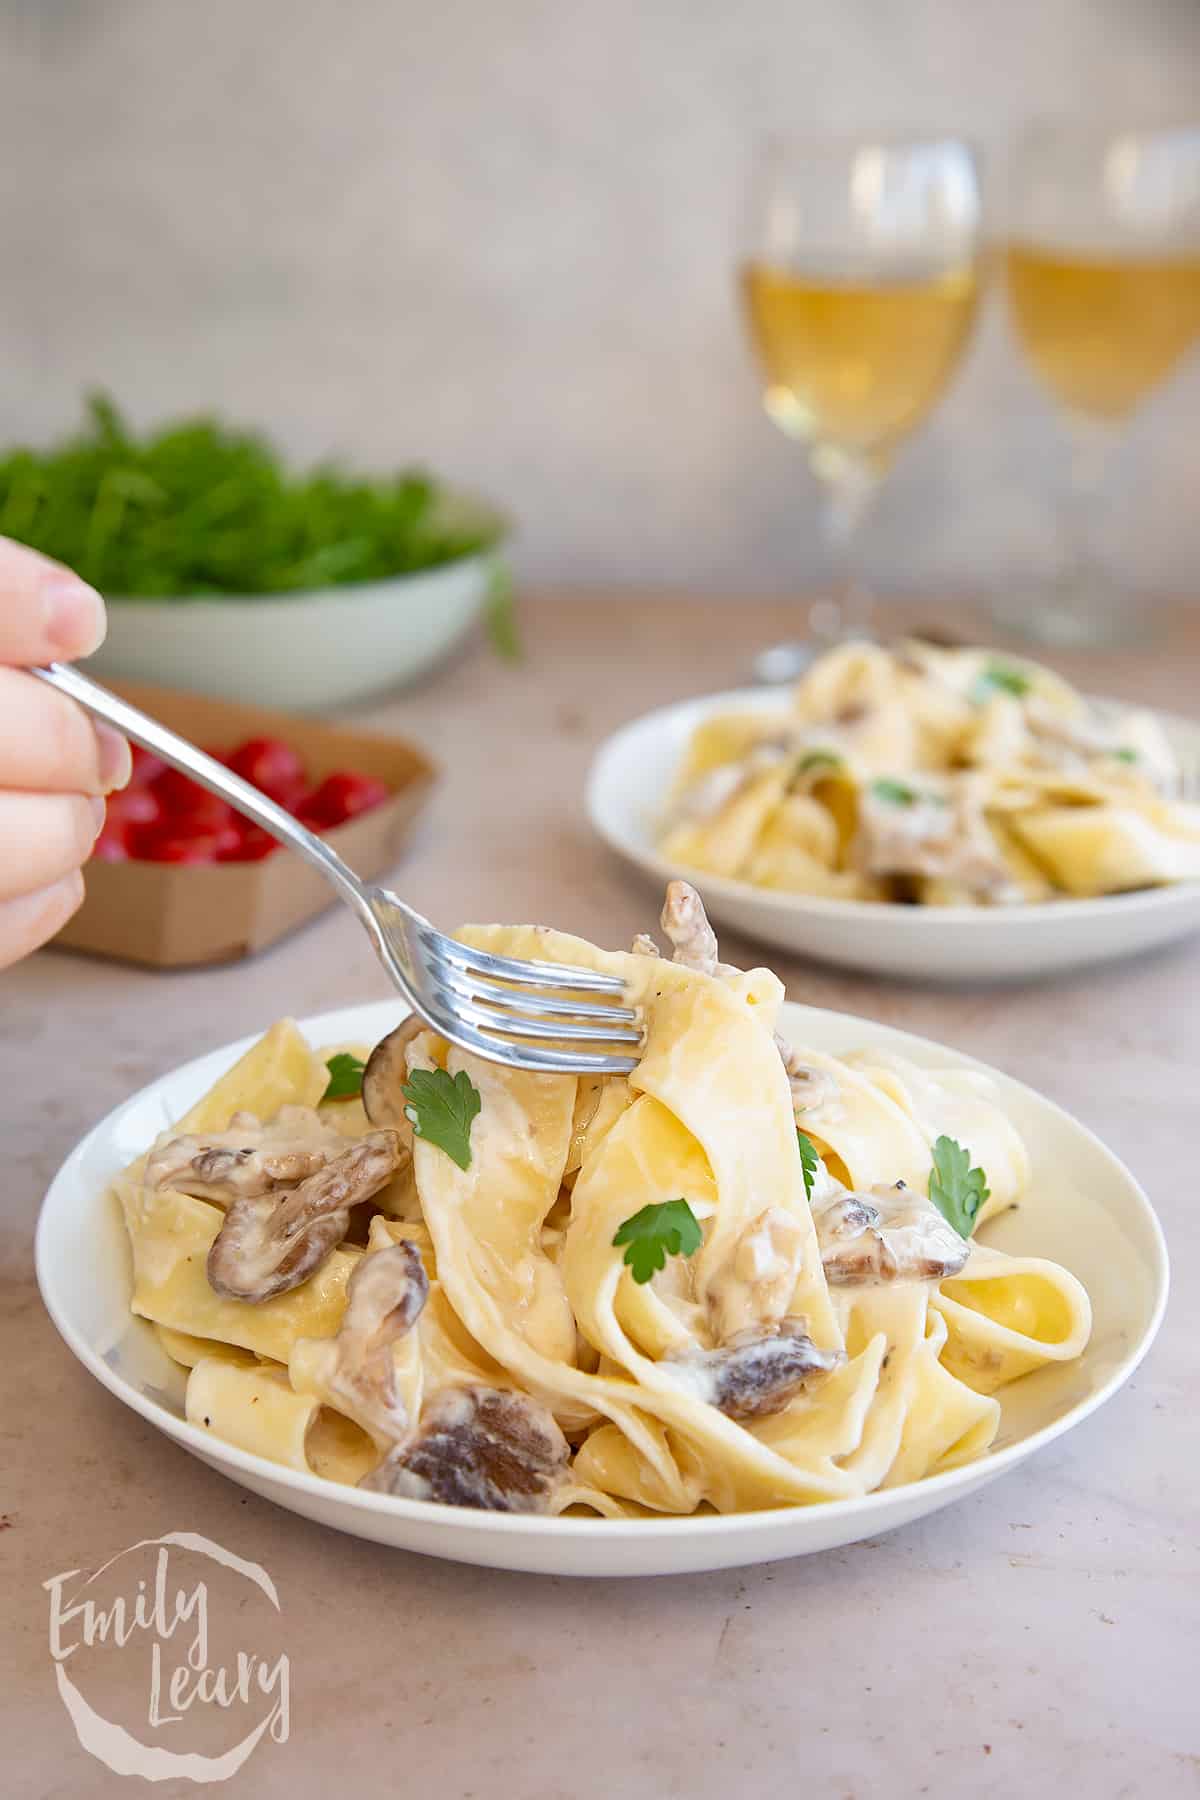 a fork picking up a bite of Creamy mushroom pappardelle from a white bowl on a light surface.